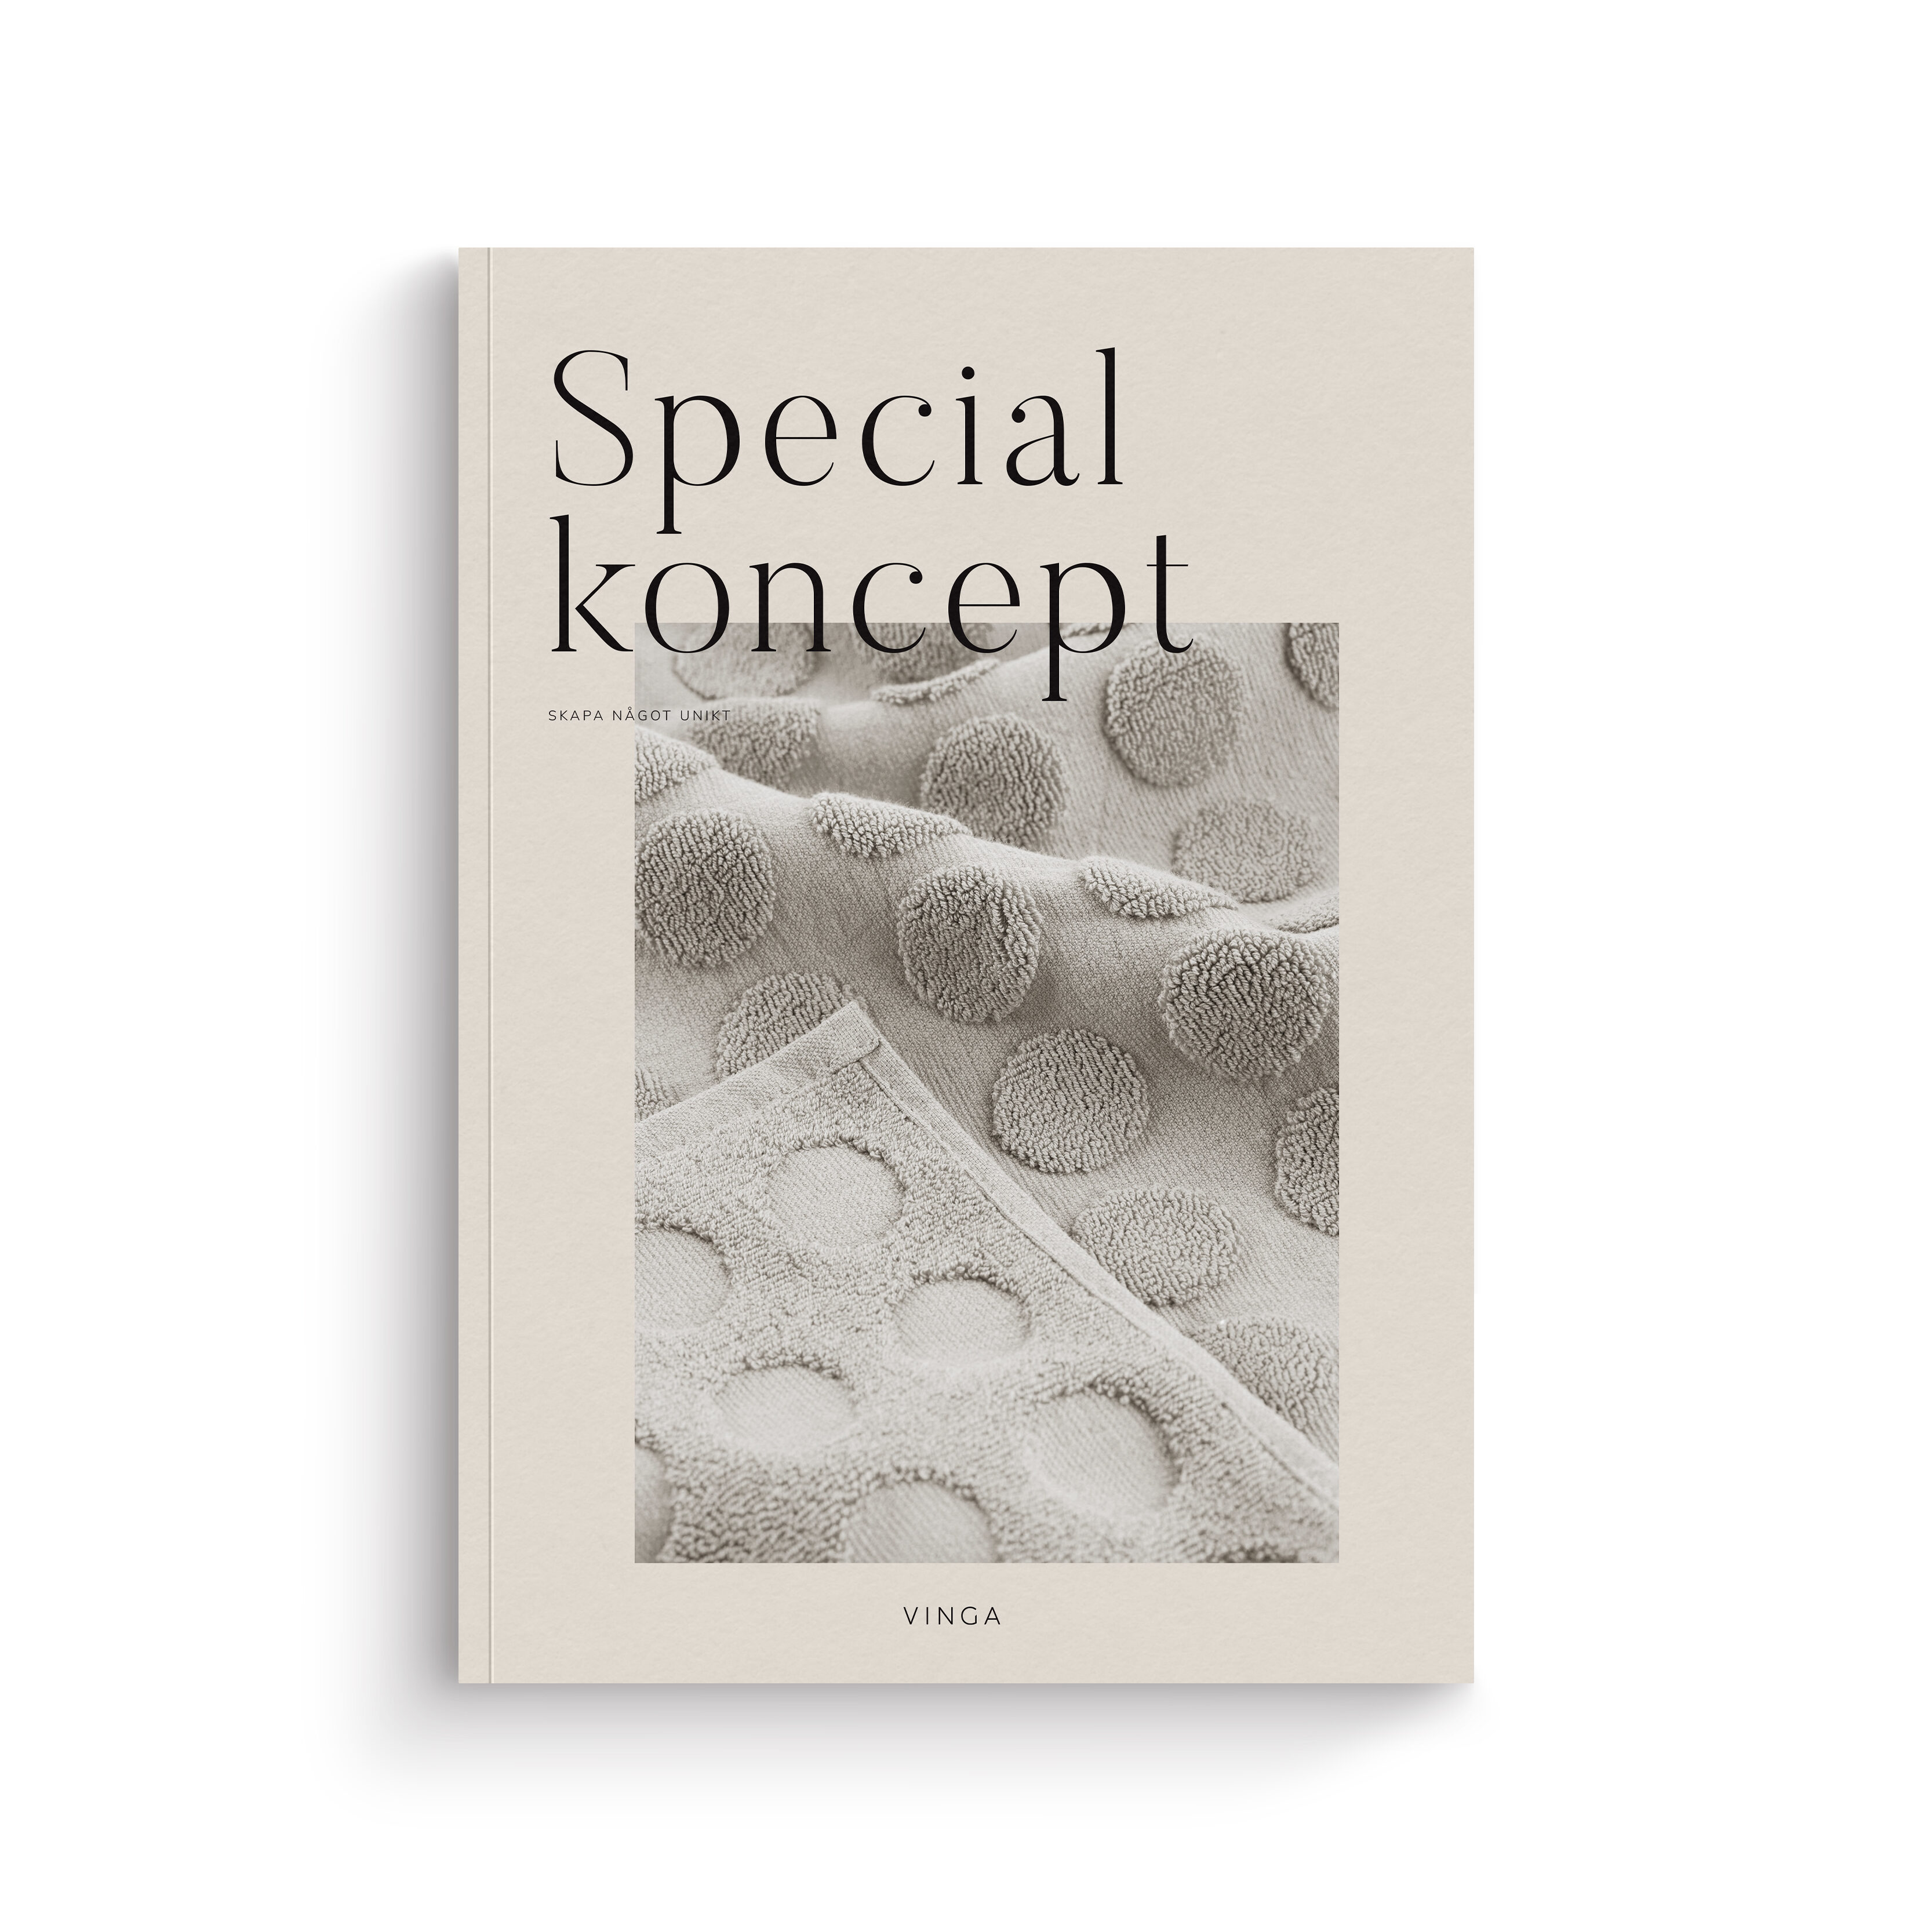 Specialkoncept_cover.jpg